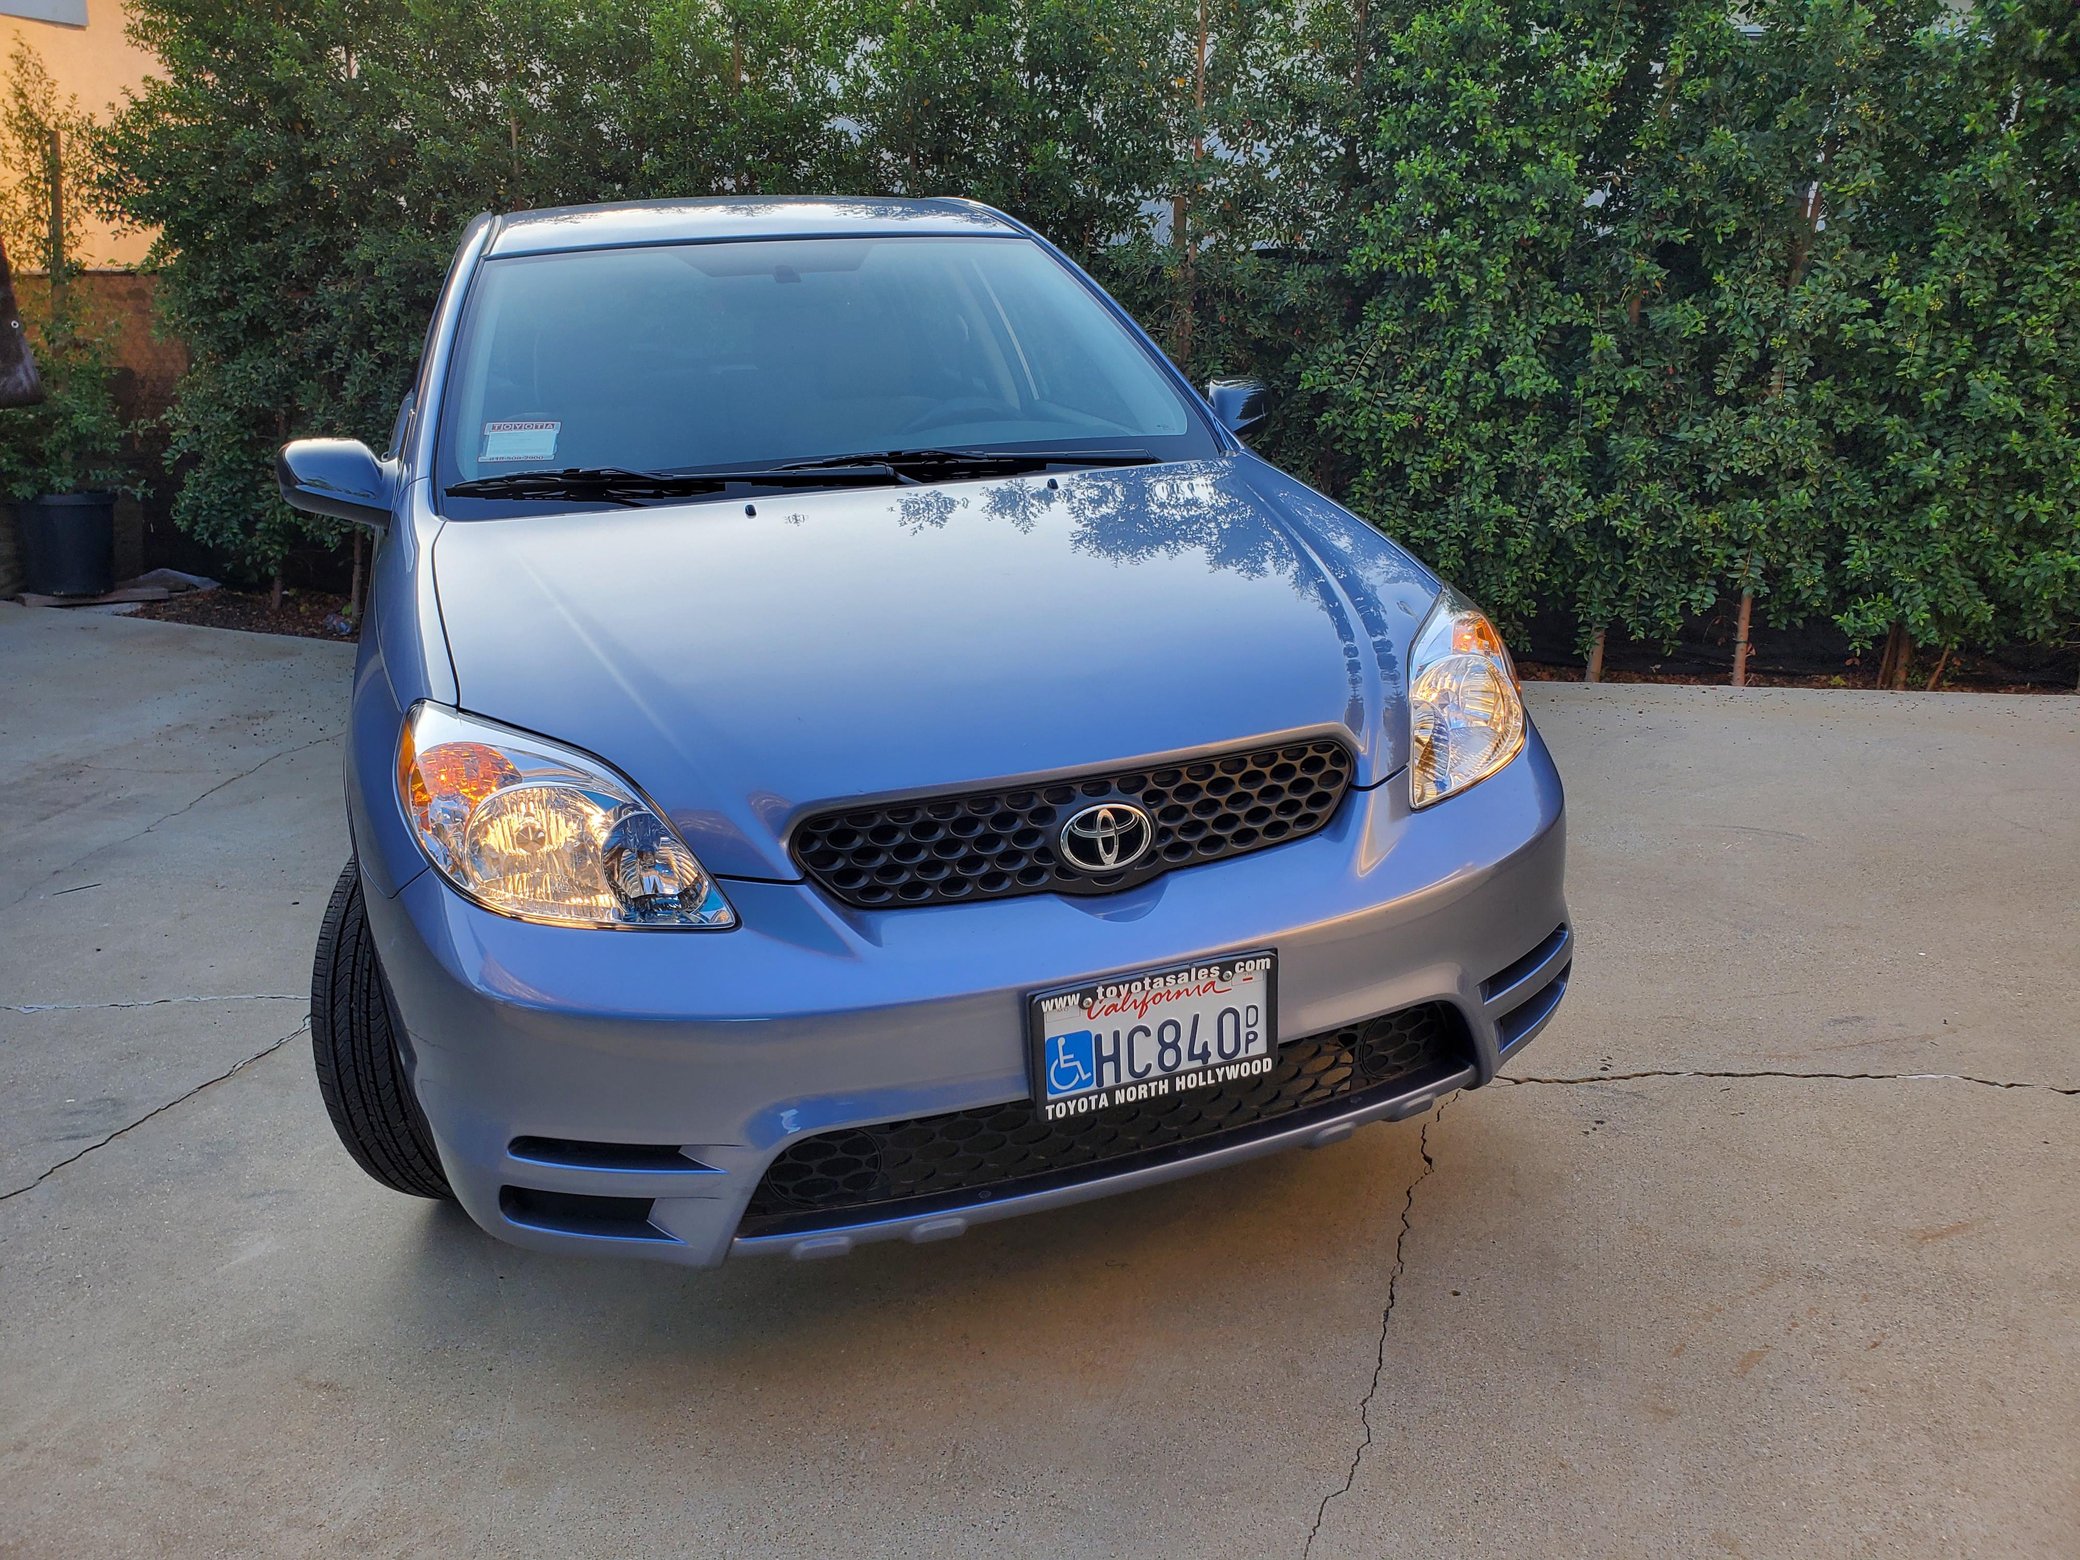 356 Mile 2003 Toyota Matrix Is An Unlikely Time Capsule